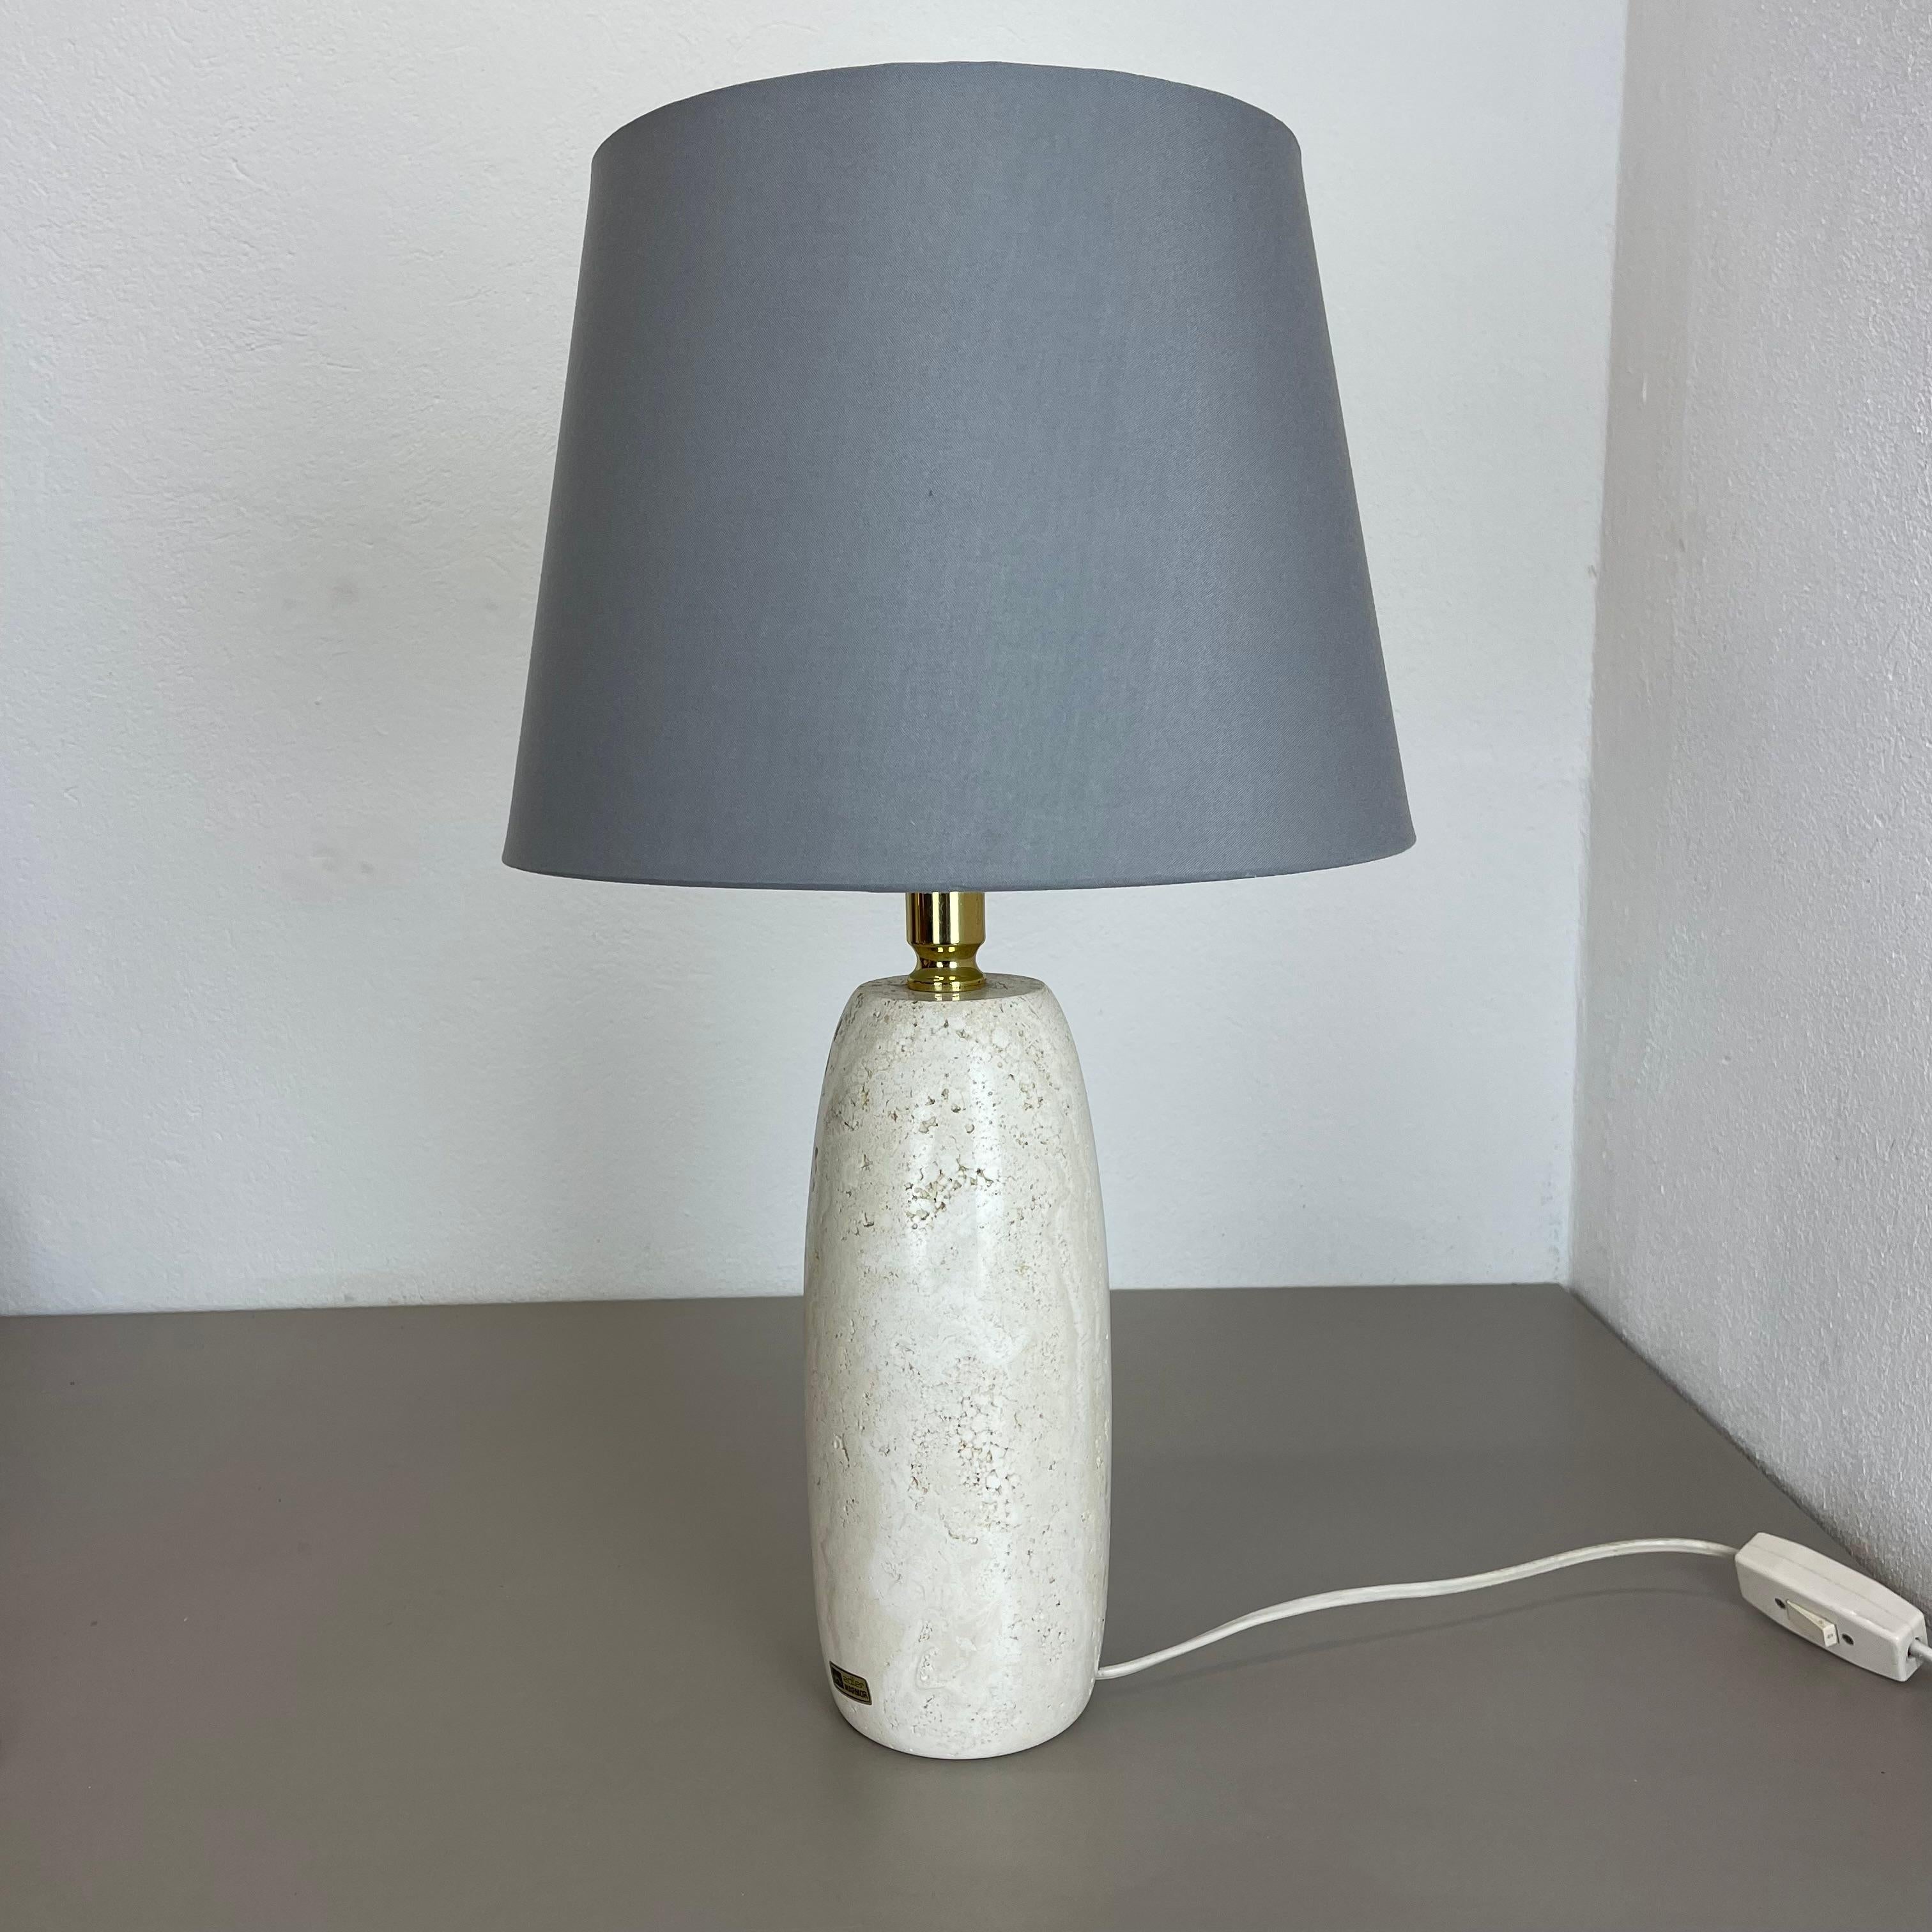 6.4kg Travertine Marble Fratelli Mannelli Style Table Light Base, Italy, 1970s For Sale 10